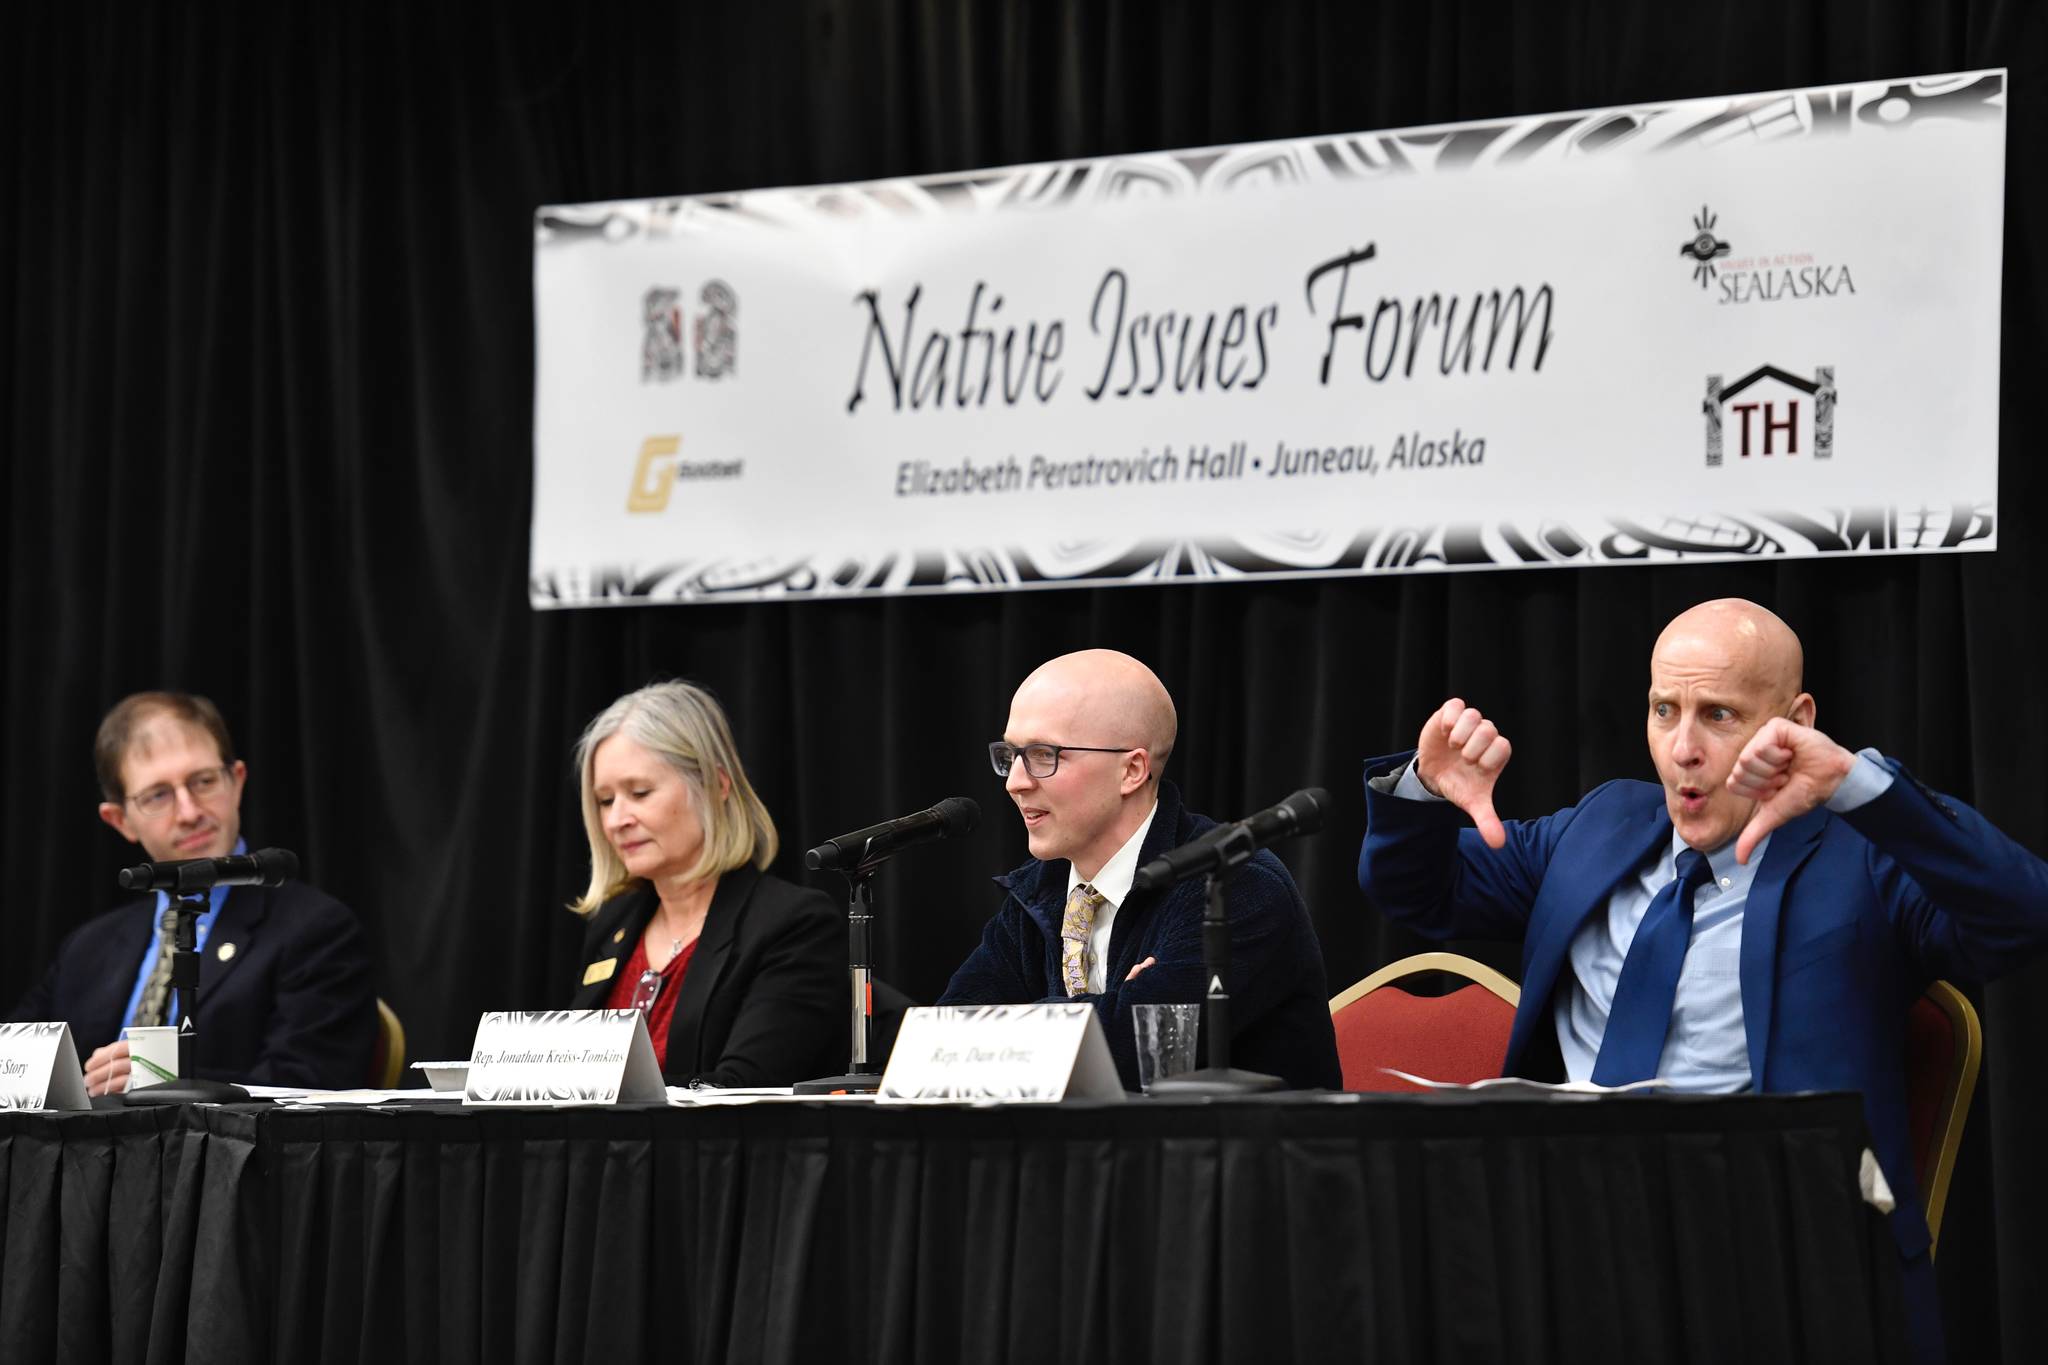 Rep. Dan Ortiz, I-Ketchikan, right, reacts as Rep. Jonathan Kreiss-Tompkins, D-Sitka, mentions a bill to move legislative meetings to Anchorage as they speak at the Native Issues Forum with Sen. Jesse Kiehl, D-Juneau, left, and Rep. Andi Story, D-Juneau, in the Elizabeth Peratrovich Hall on Wednesday, March 13, 2019. (Michael Penn | Juneau Empire)